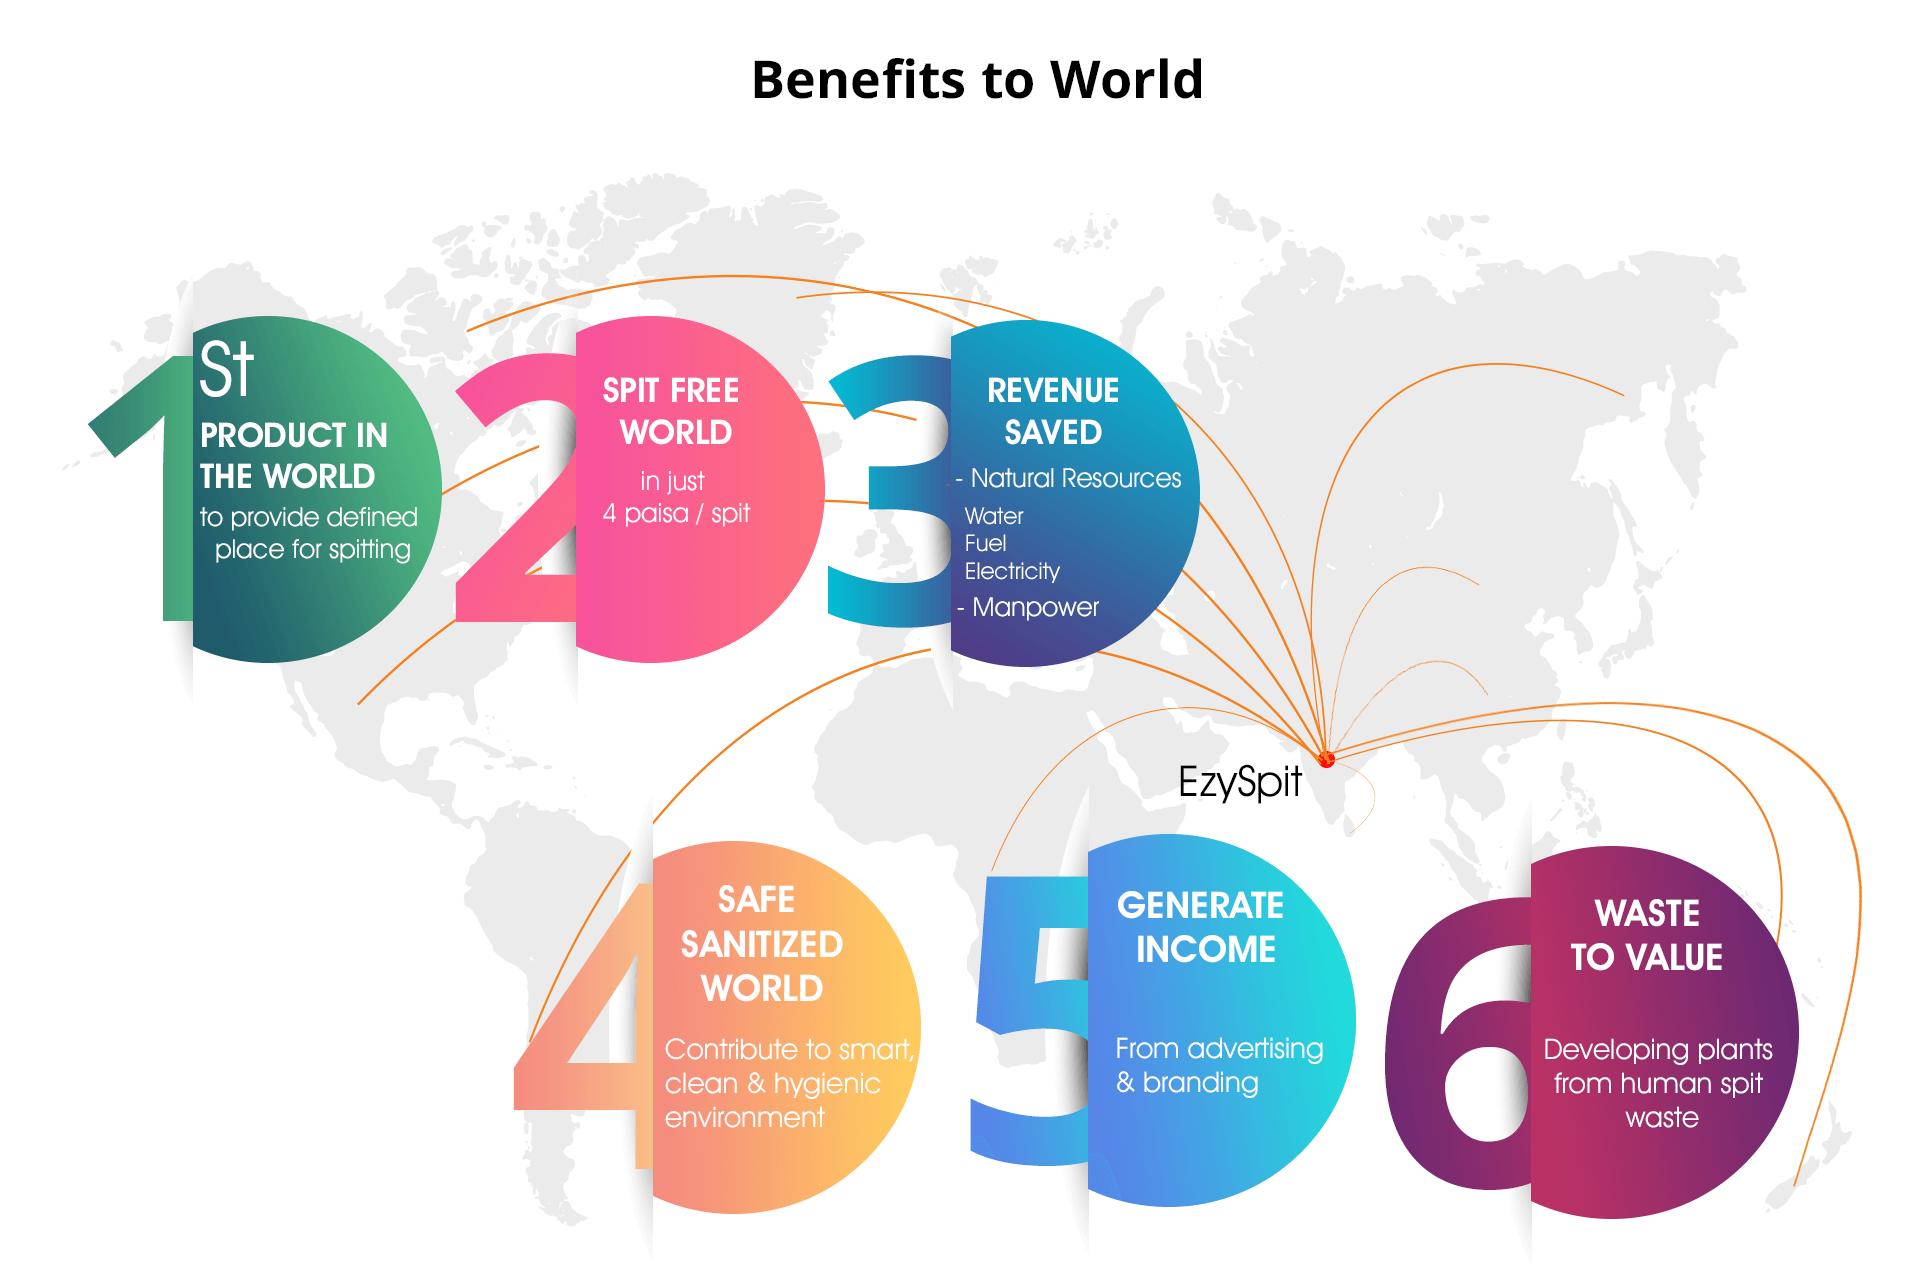 https://ezyspit.in/wp-content/uploads/2021/03/Benefits-to-world-1.png